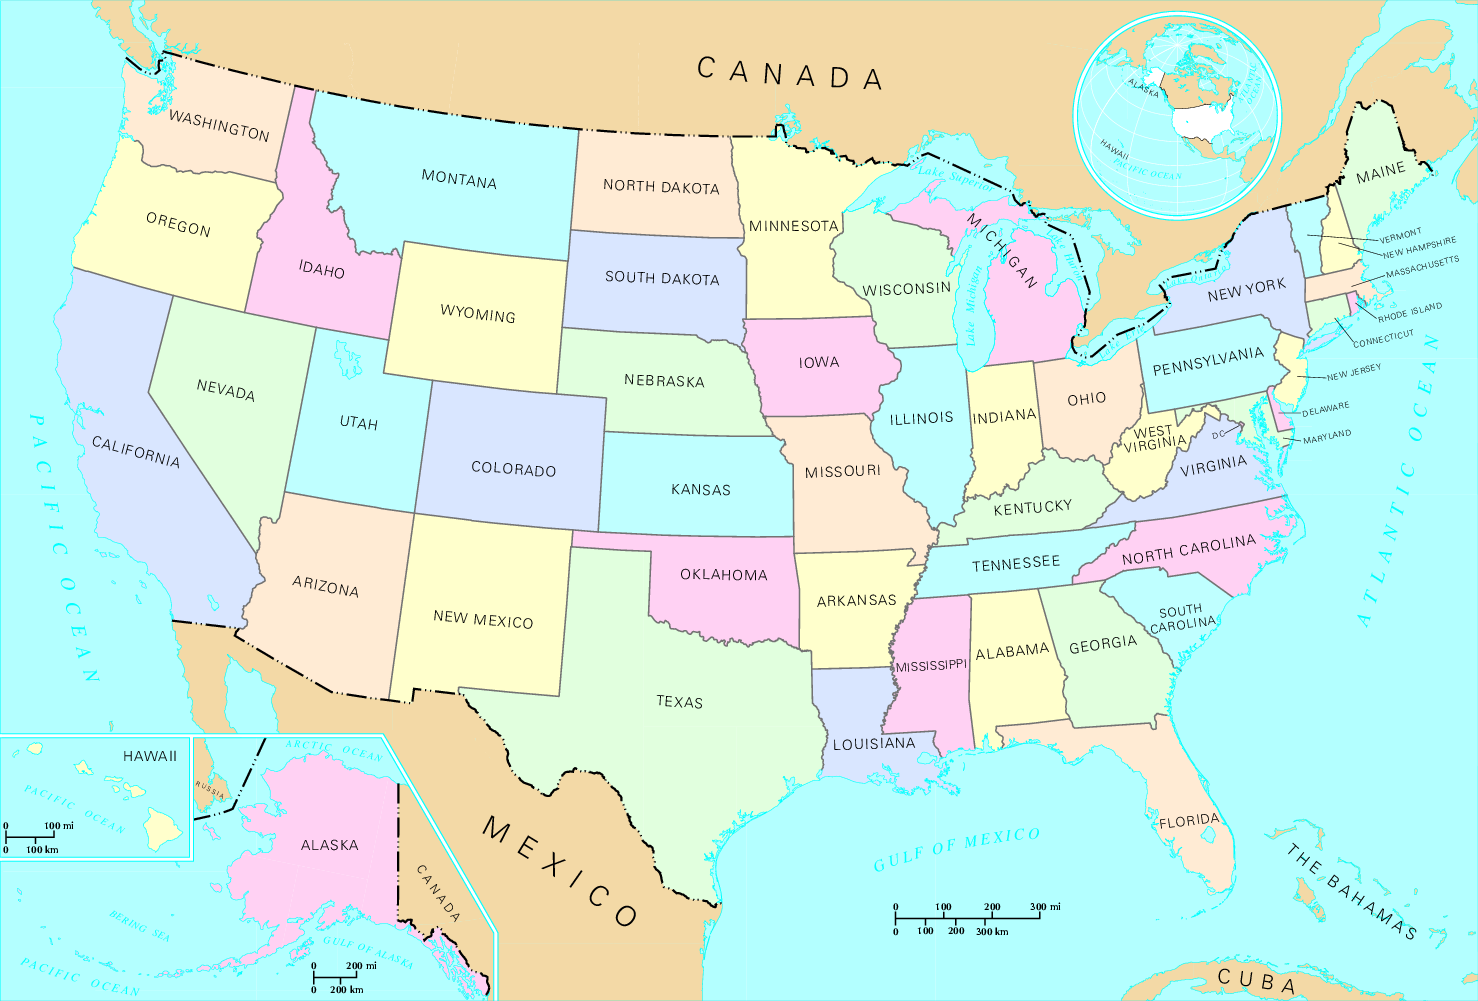 Standard map of
the 48 continental United States, with insets showing Alaska and
Hawai’i